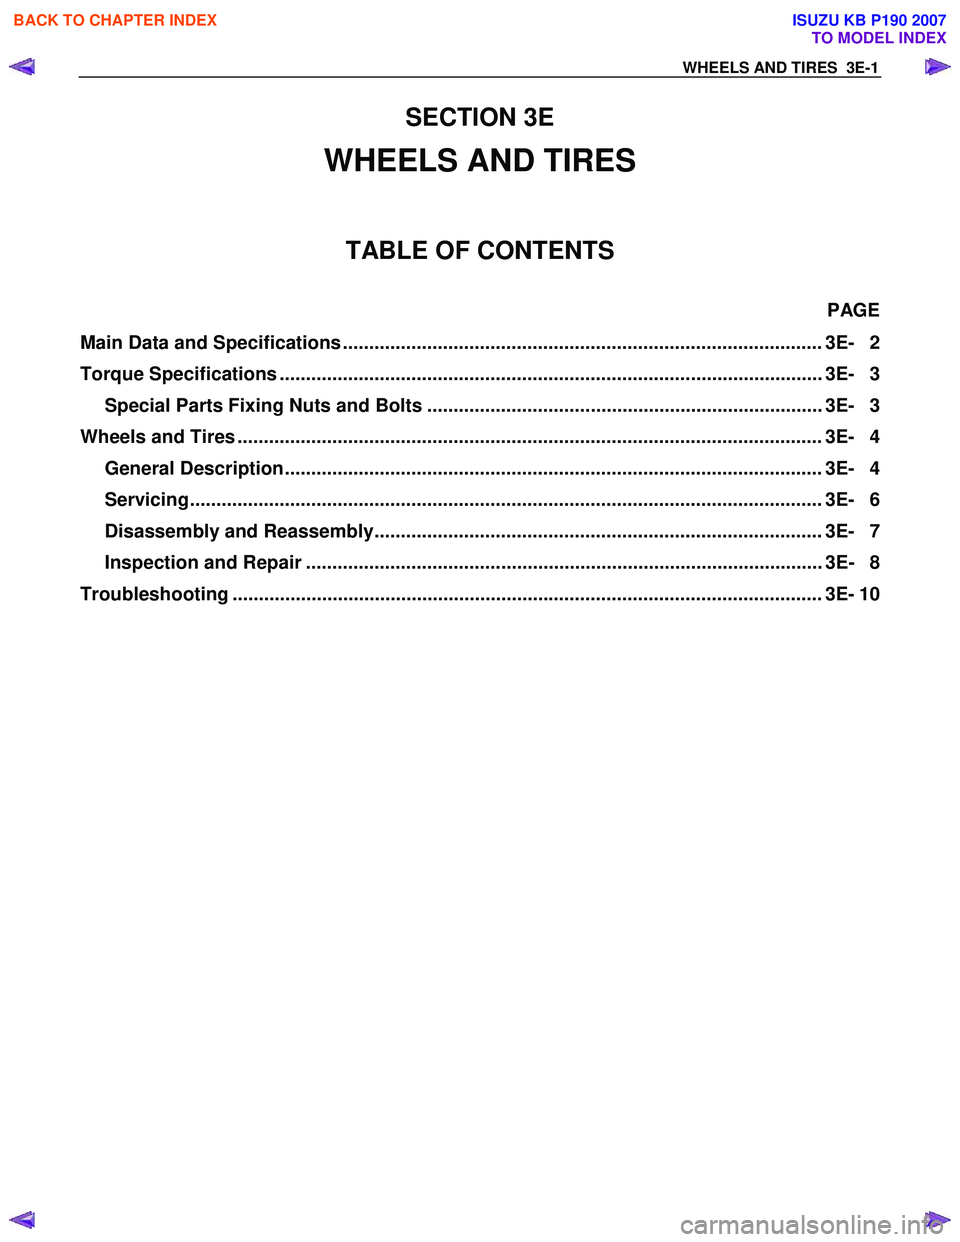 ISUZU KB P190 2007  Workshop Manual PDF WHEELS AND TIRES  3E-1 
SECTION 3E 
WHEELS AND TIRES 
TABLE OF CONTENTS 
 PAGE 
Main Data and Specifications ...........................................................................................